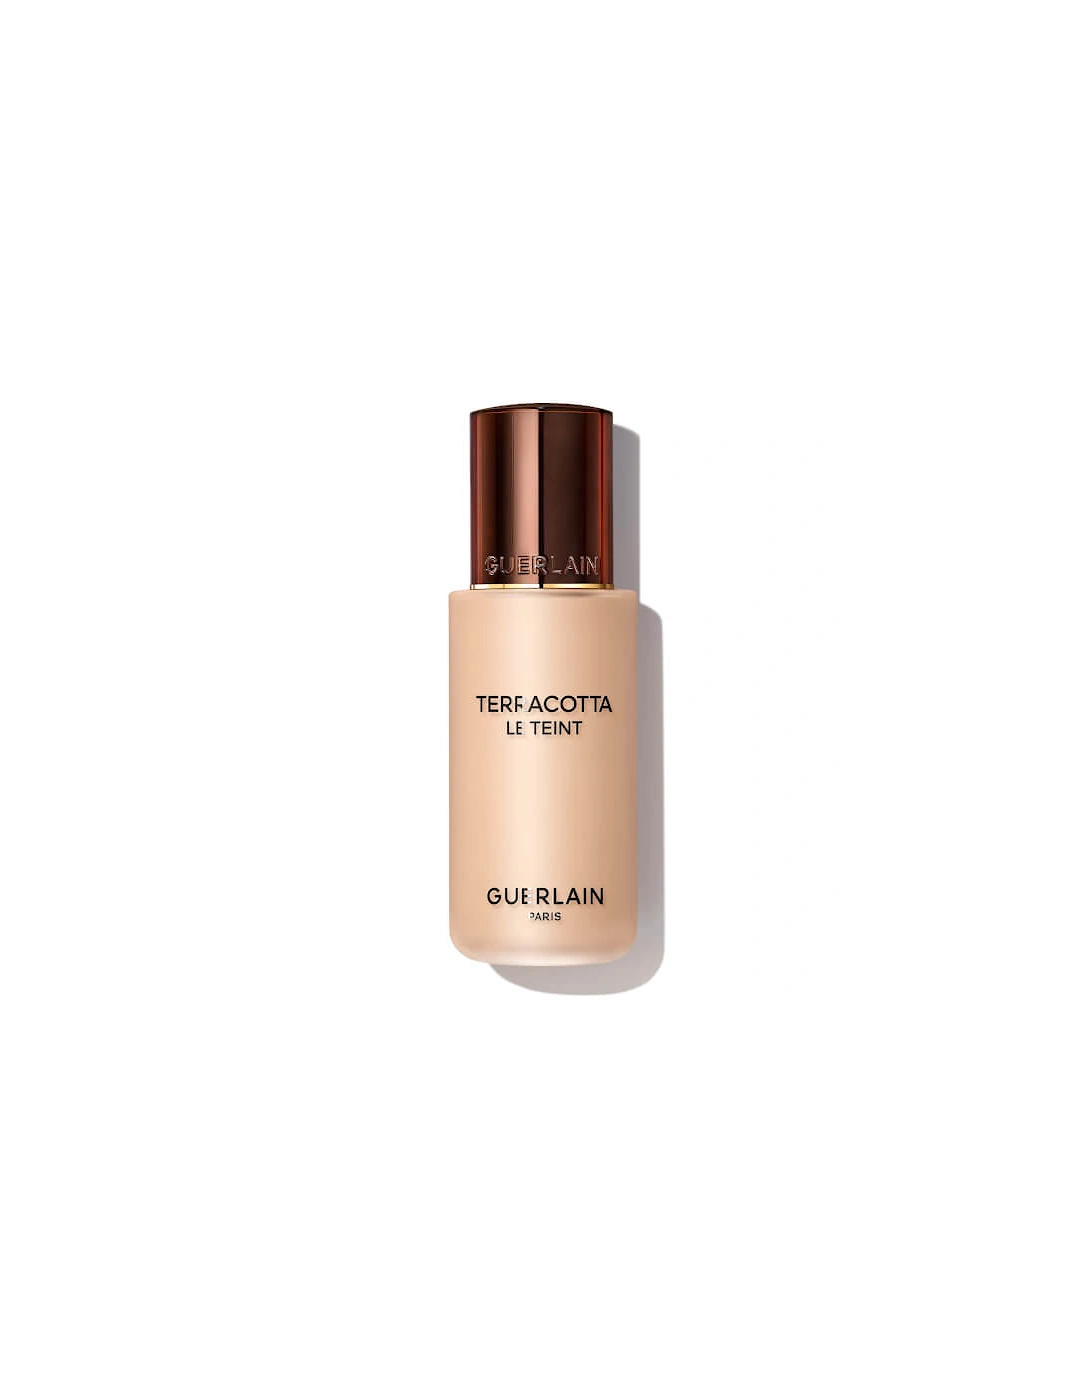 Terracotta Le Teint Healthy Glow Natural Perfection Foundation - 2N, 2 of 1